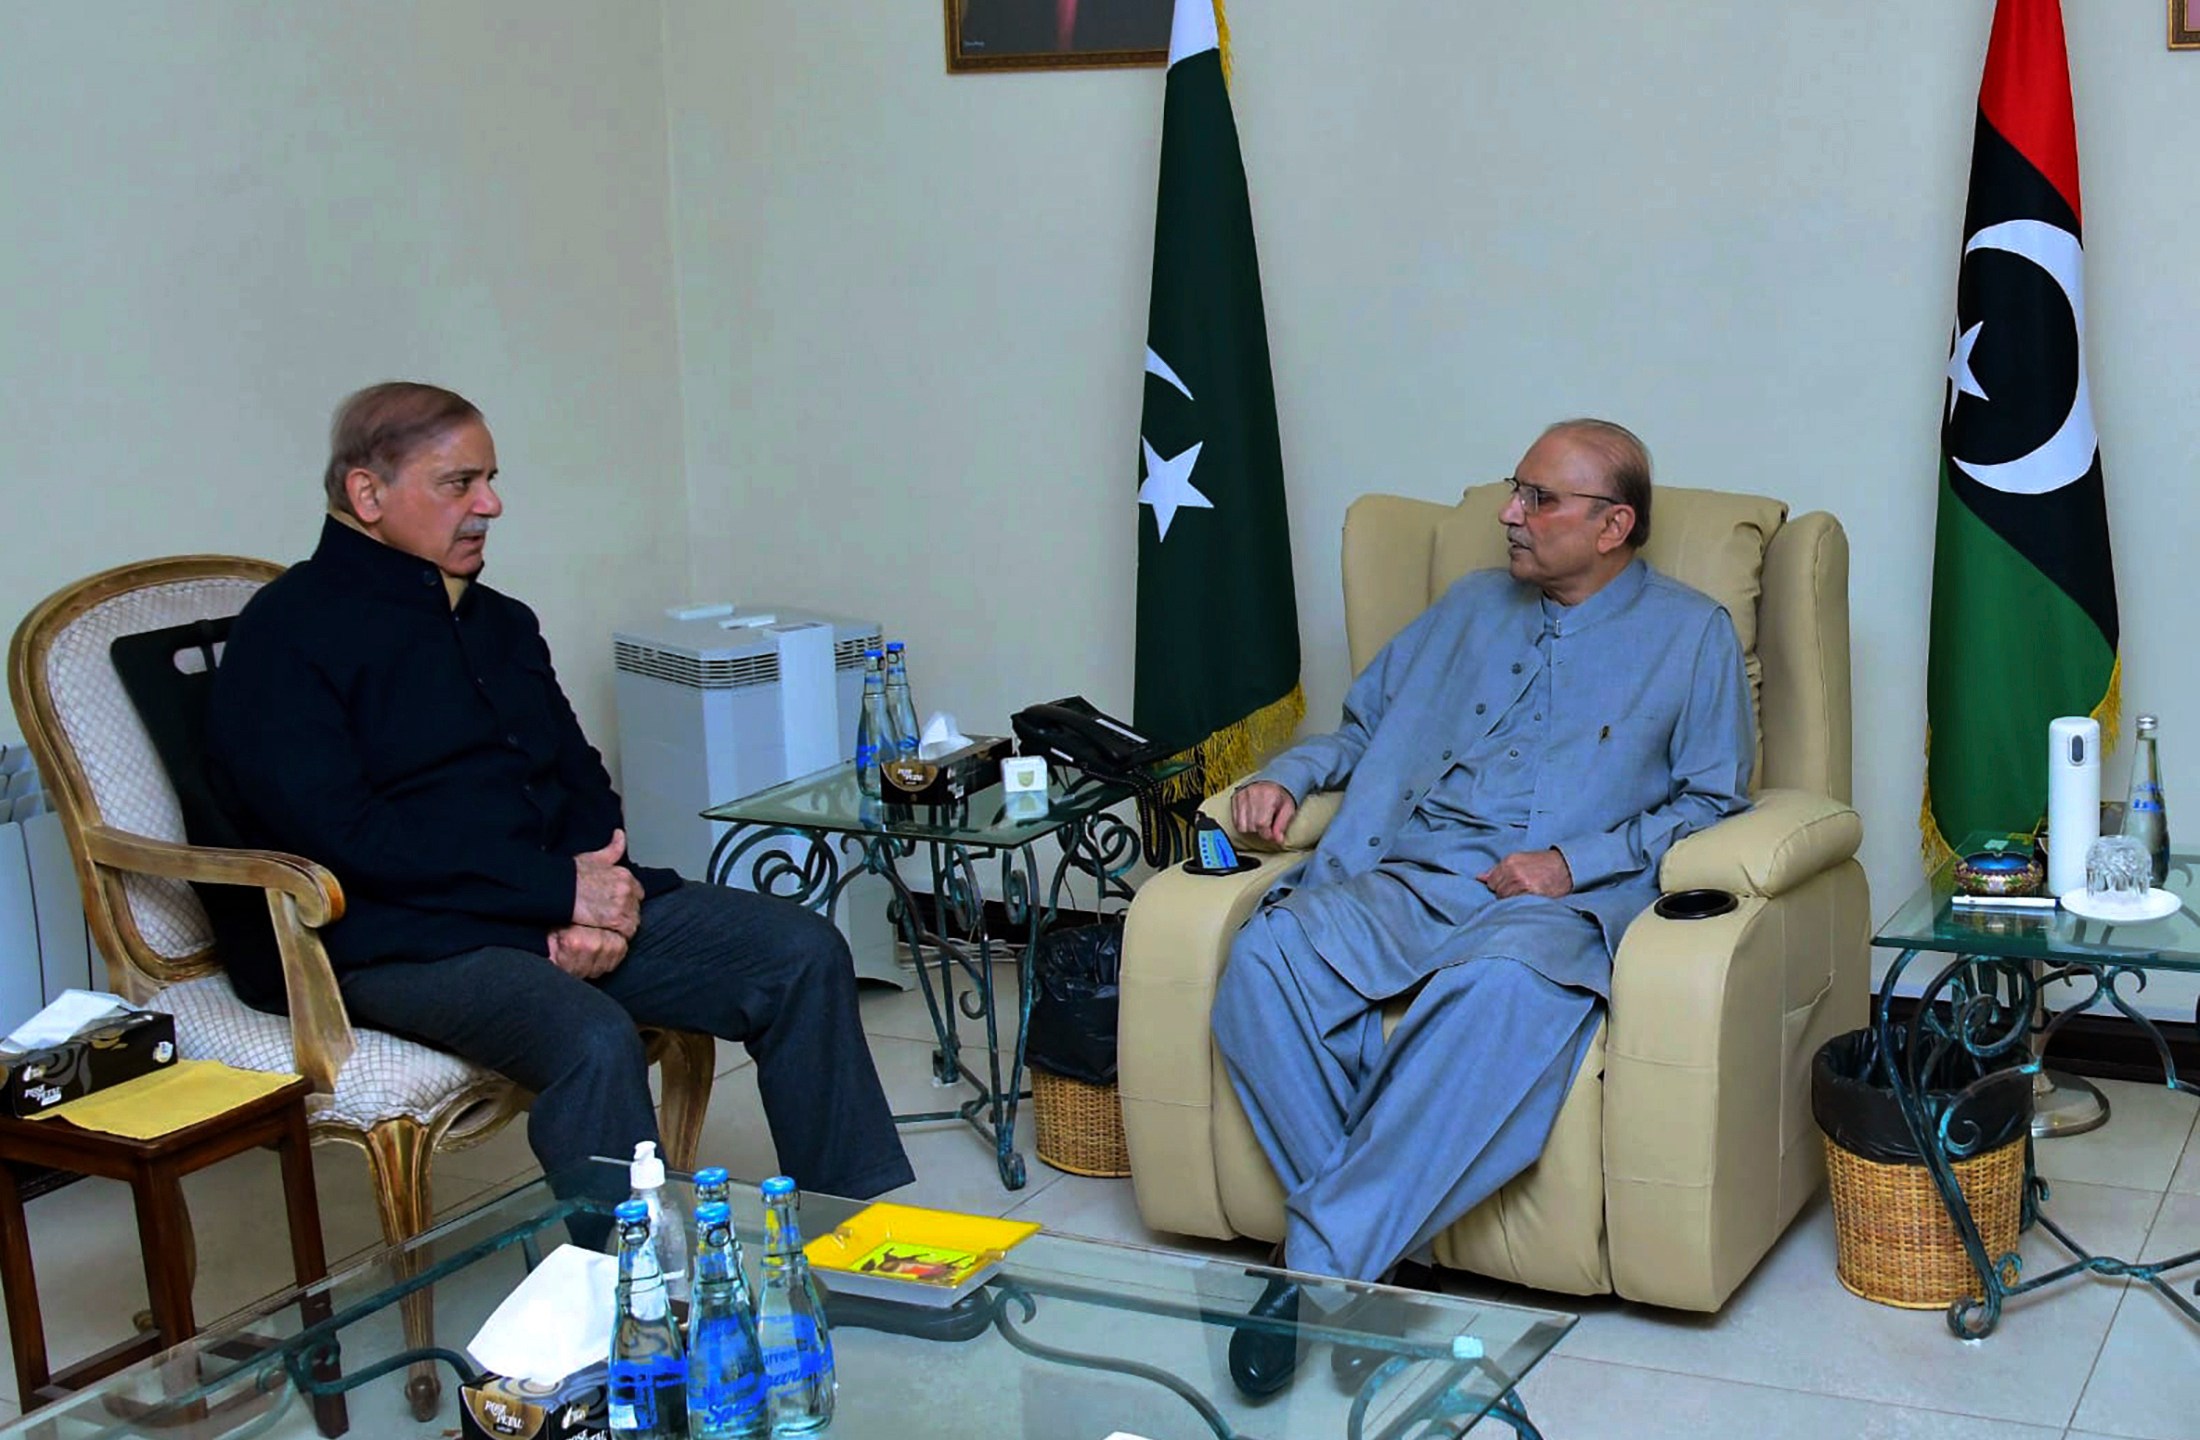 In this photo released by Prime Minister Office, Prime Minister Shehbaz Sharif, left, meets with newly election Pakistan's President Asif Ali Zardari, in Islamabad, Pakistan, Saturday, March 9, 2023. Pakistan's lawmakers have chosen Zardari as the country's new president. It's his second time in the job. Zardari is the widower of assassinated former Premier Benazir Bhutto and the father of former Foreign Minister Bilawal Bhutto-Zardari, (Prime Minister Office via AP)